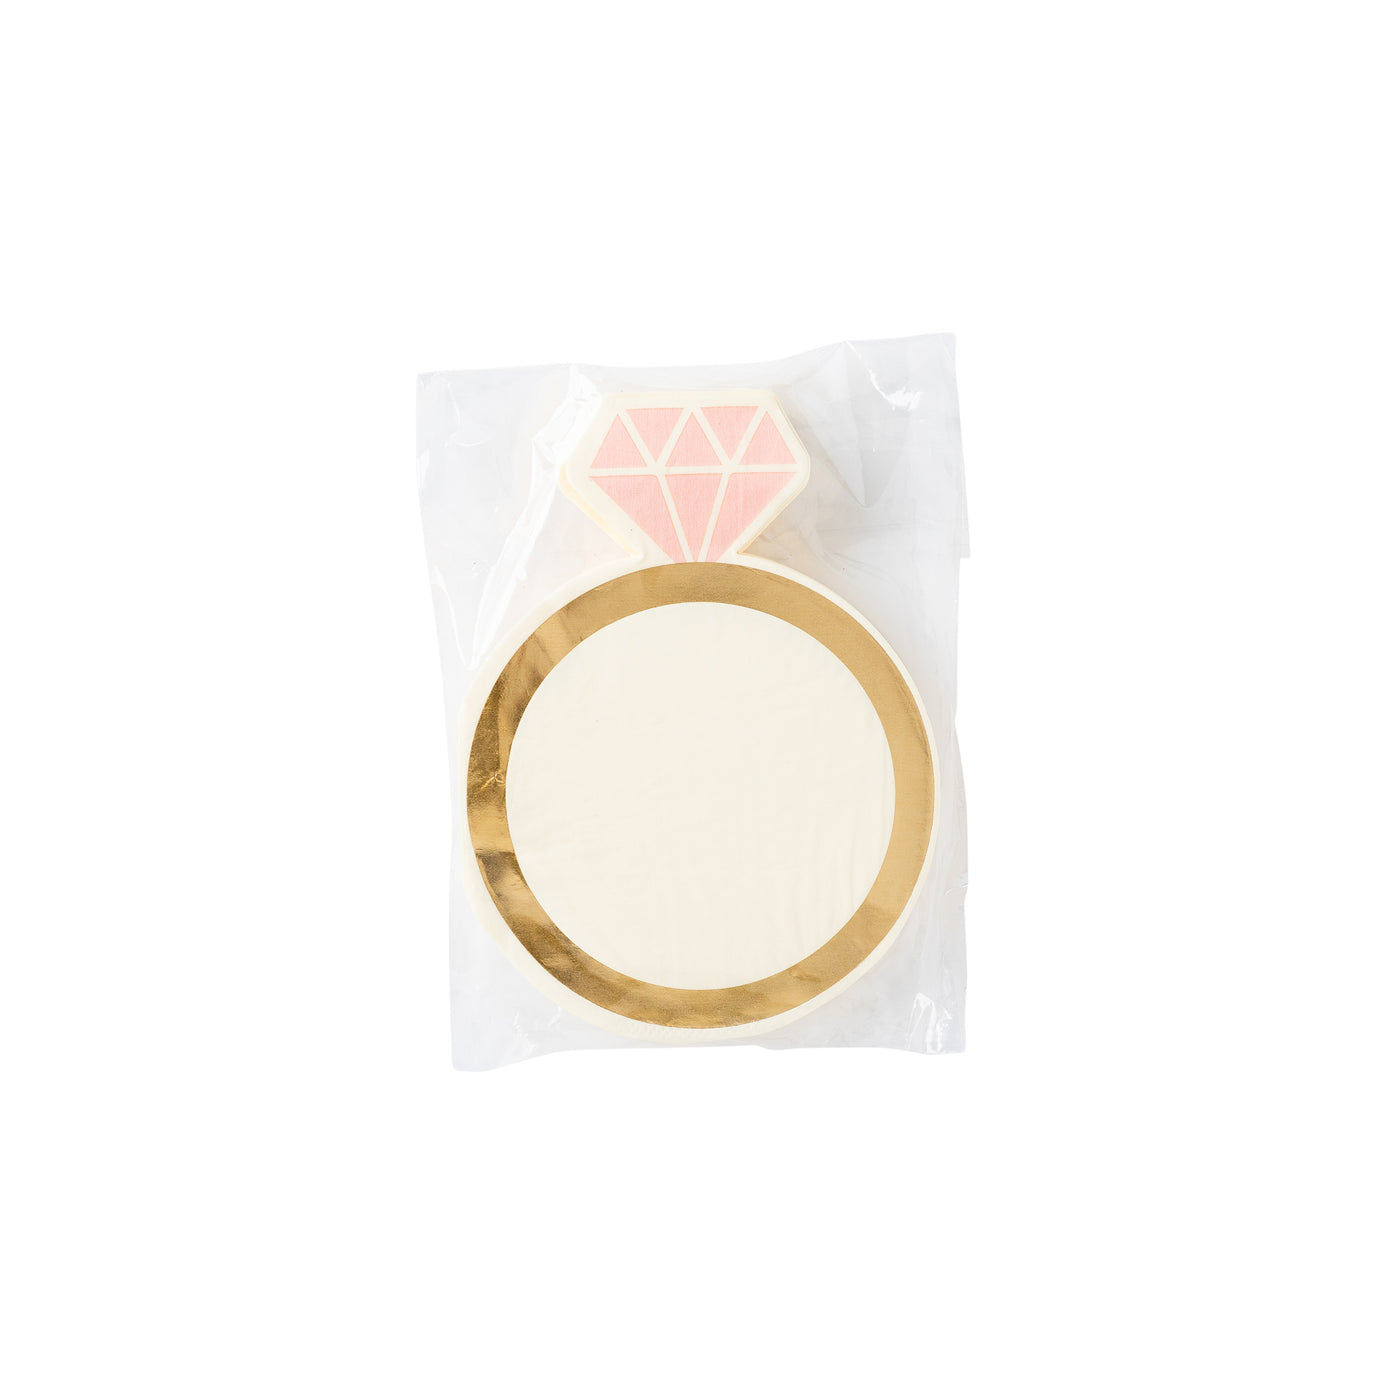 PLTS335O - Ring Shaped Paper Cocktail Napkin (18ct)